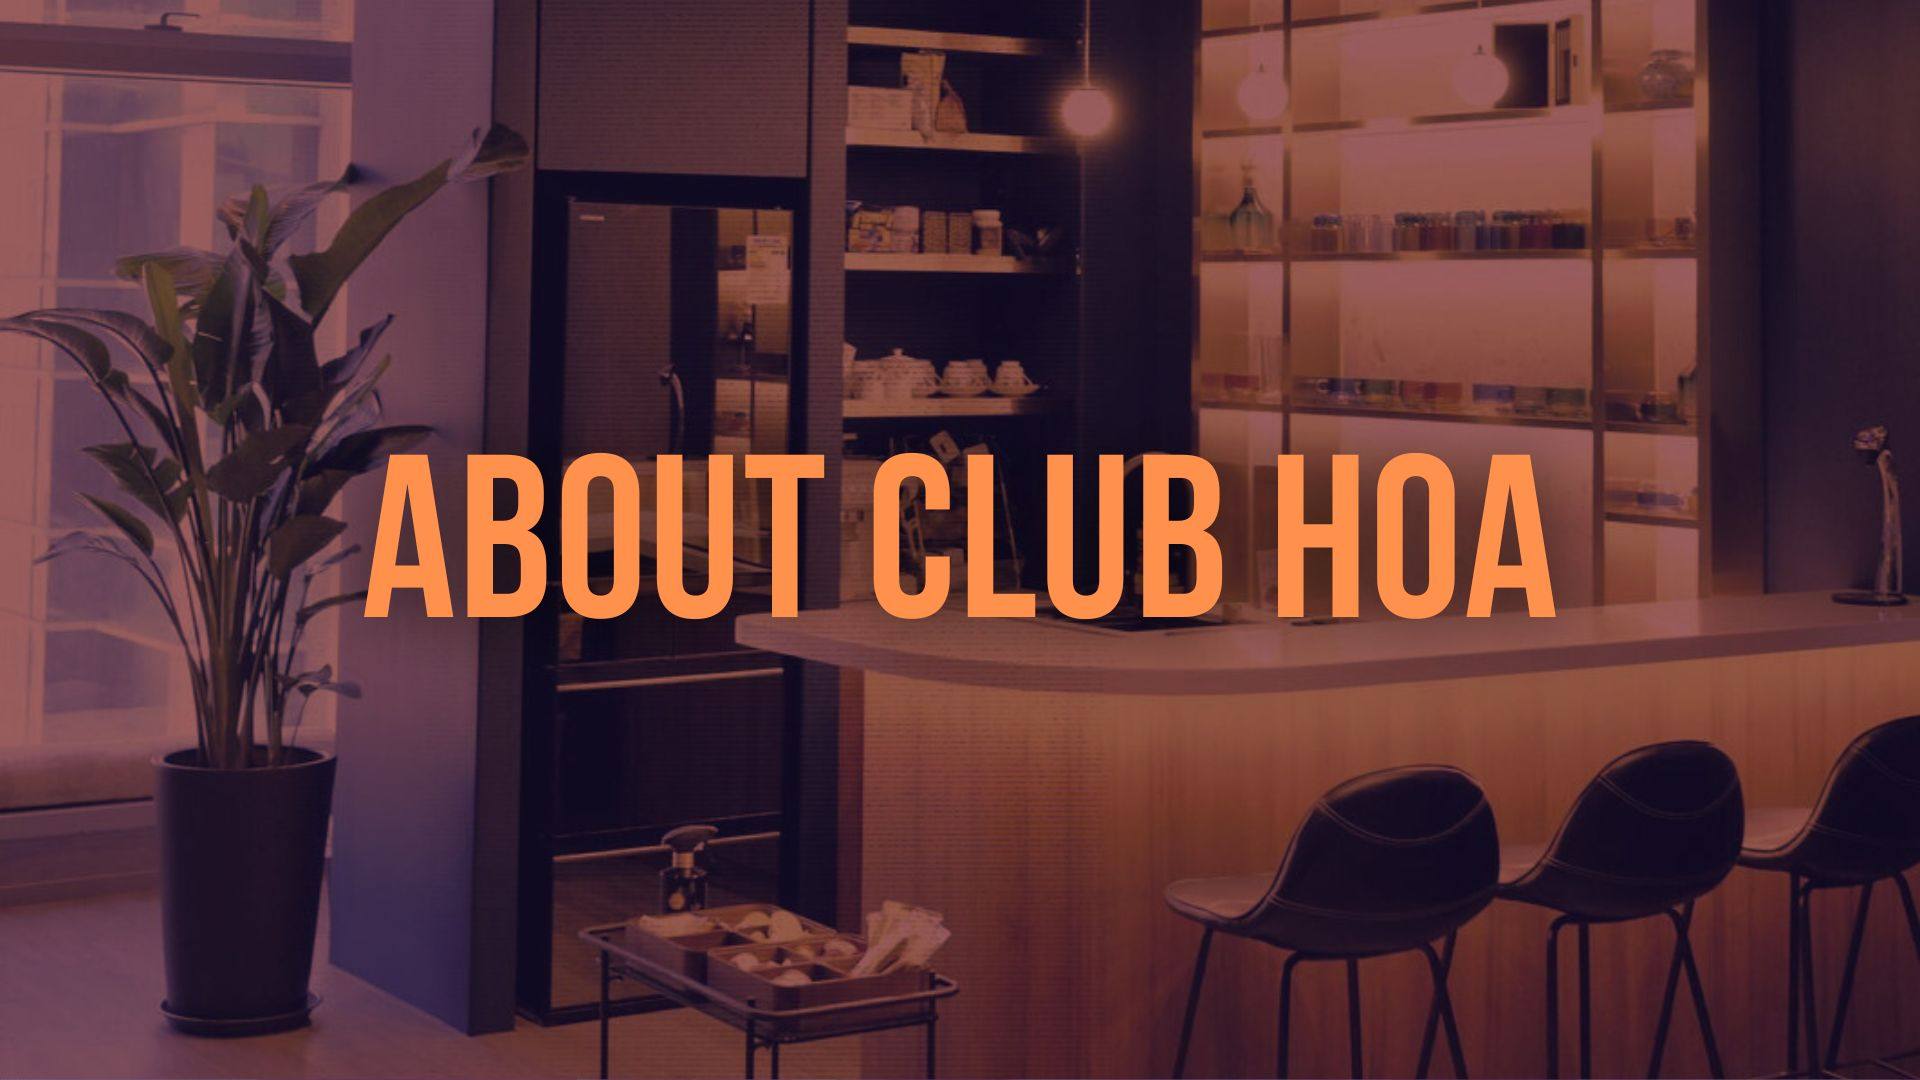 About CLUB HOA